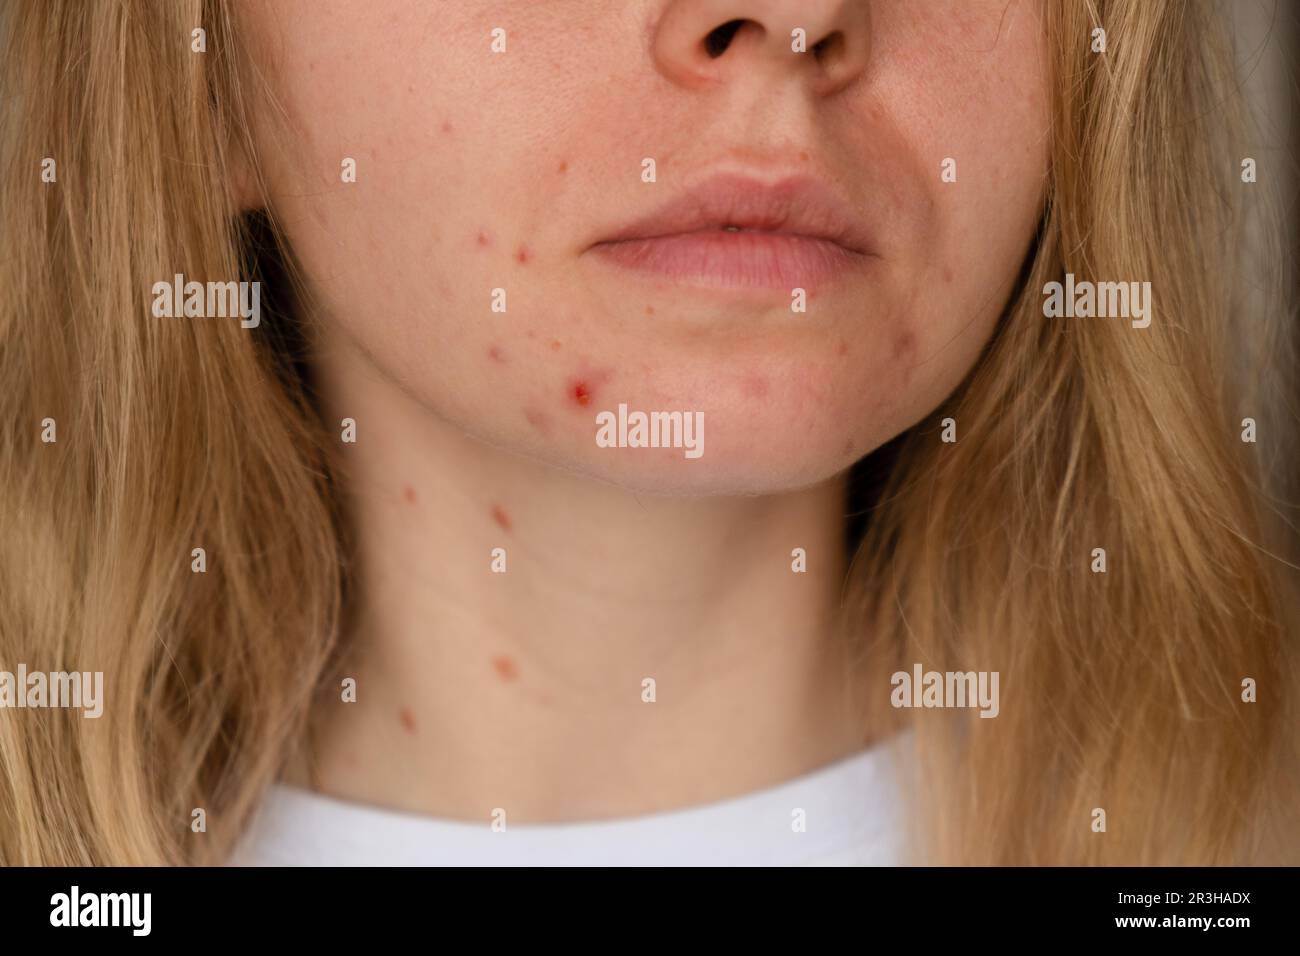 Unrecognizable woman showing her acne on face. Close-up acne on woman's face with rash skin ,scar and spot that allergic to cosm Stock Photo